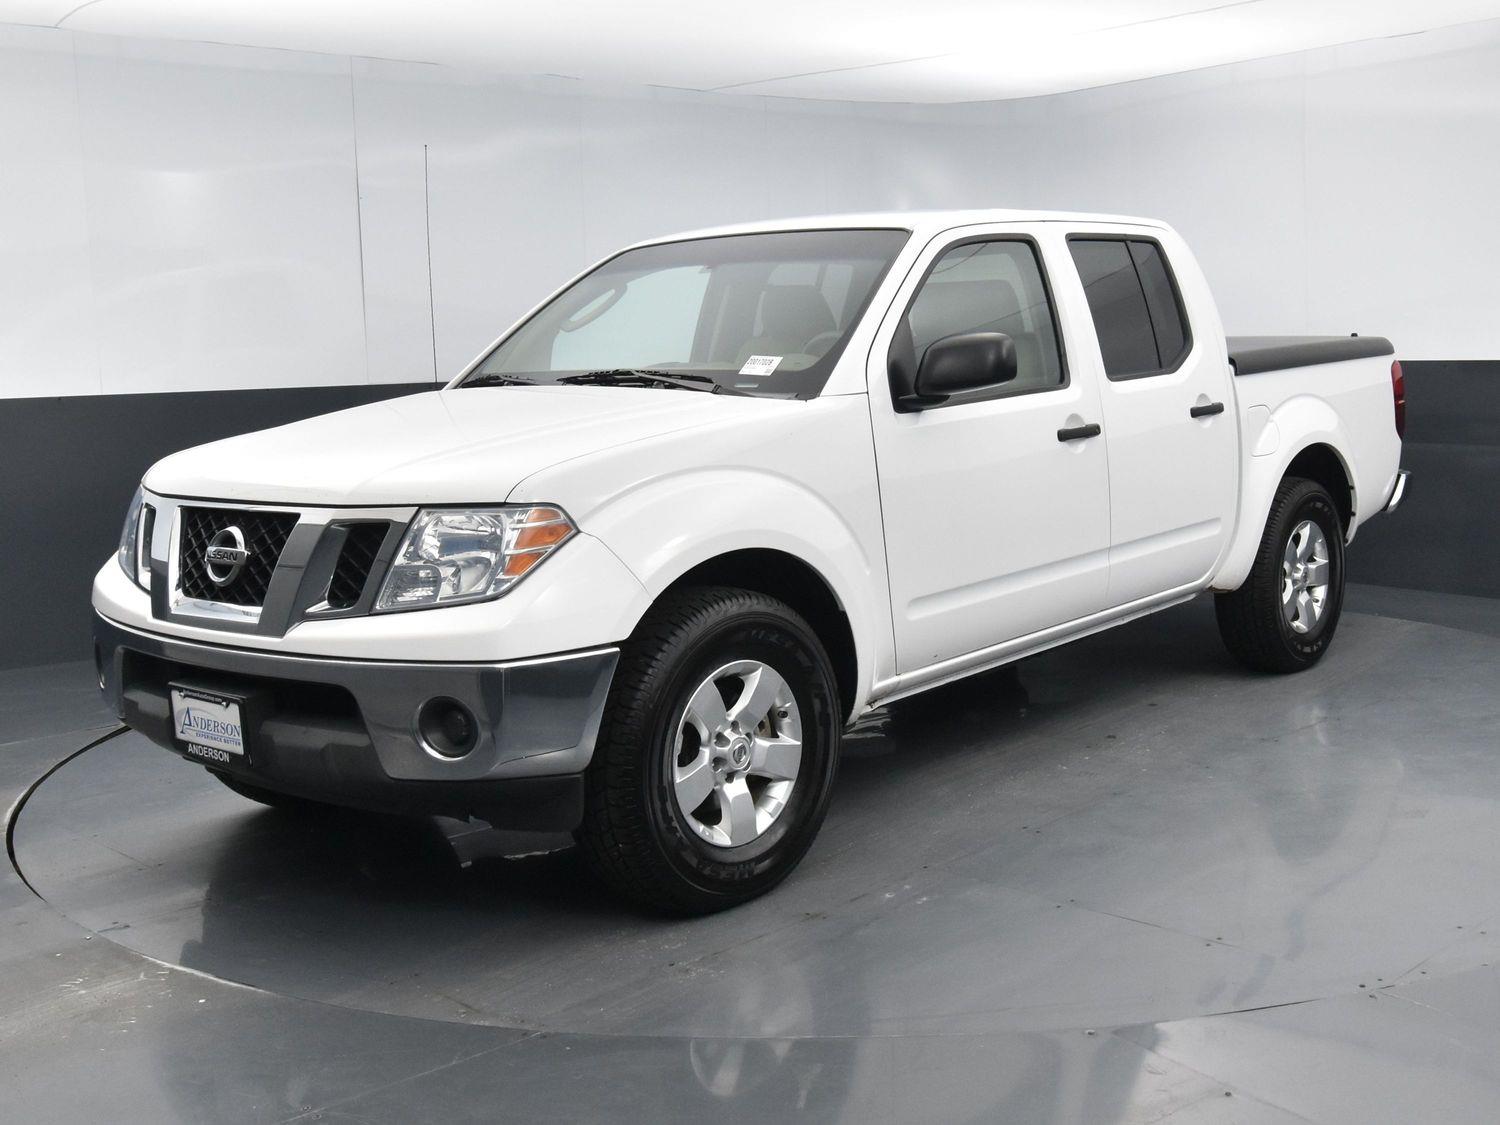 Used 2009 Nissan Frontier SE Crew Cab for sale in Grand Island NE